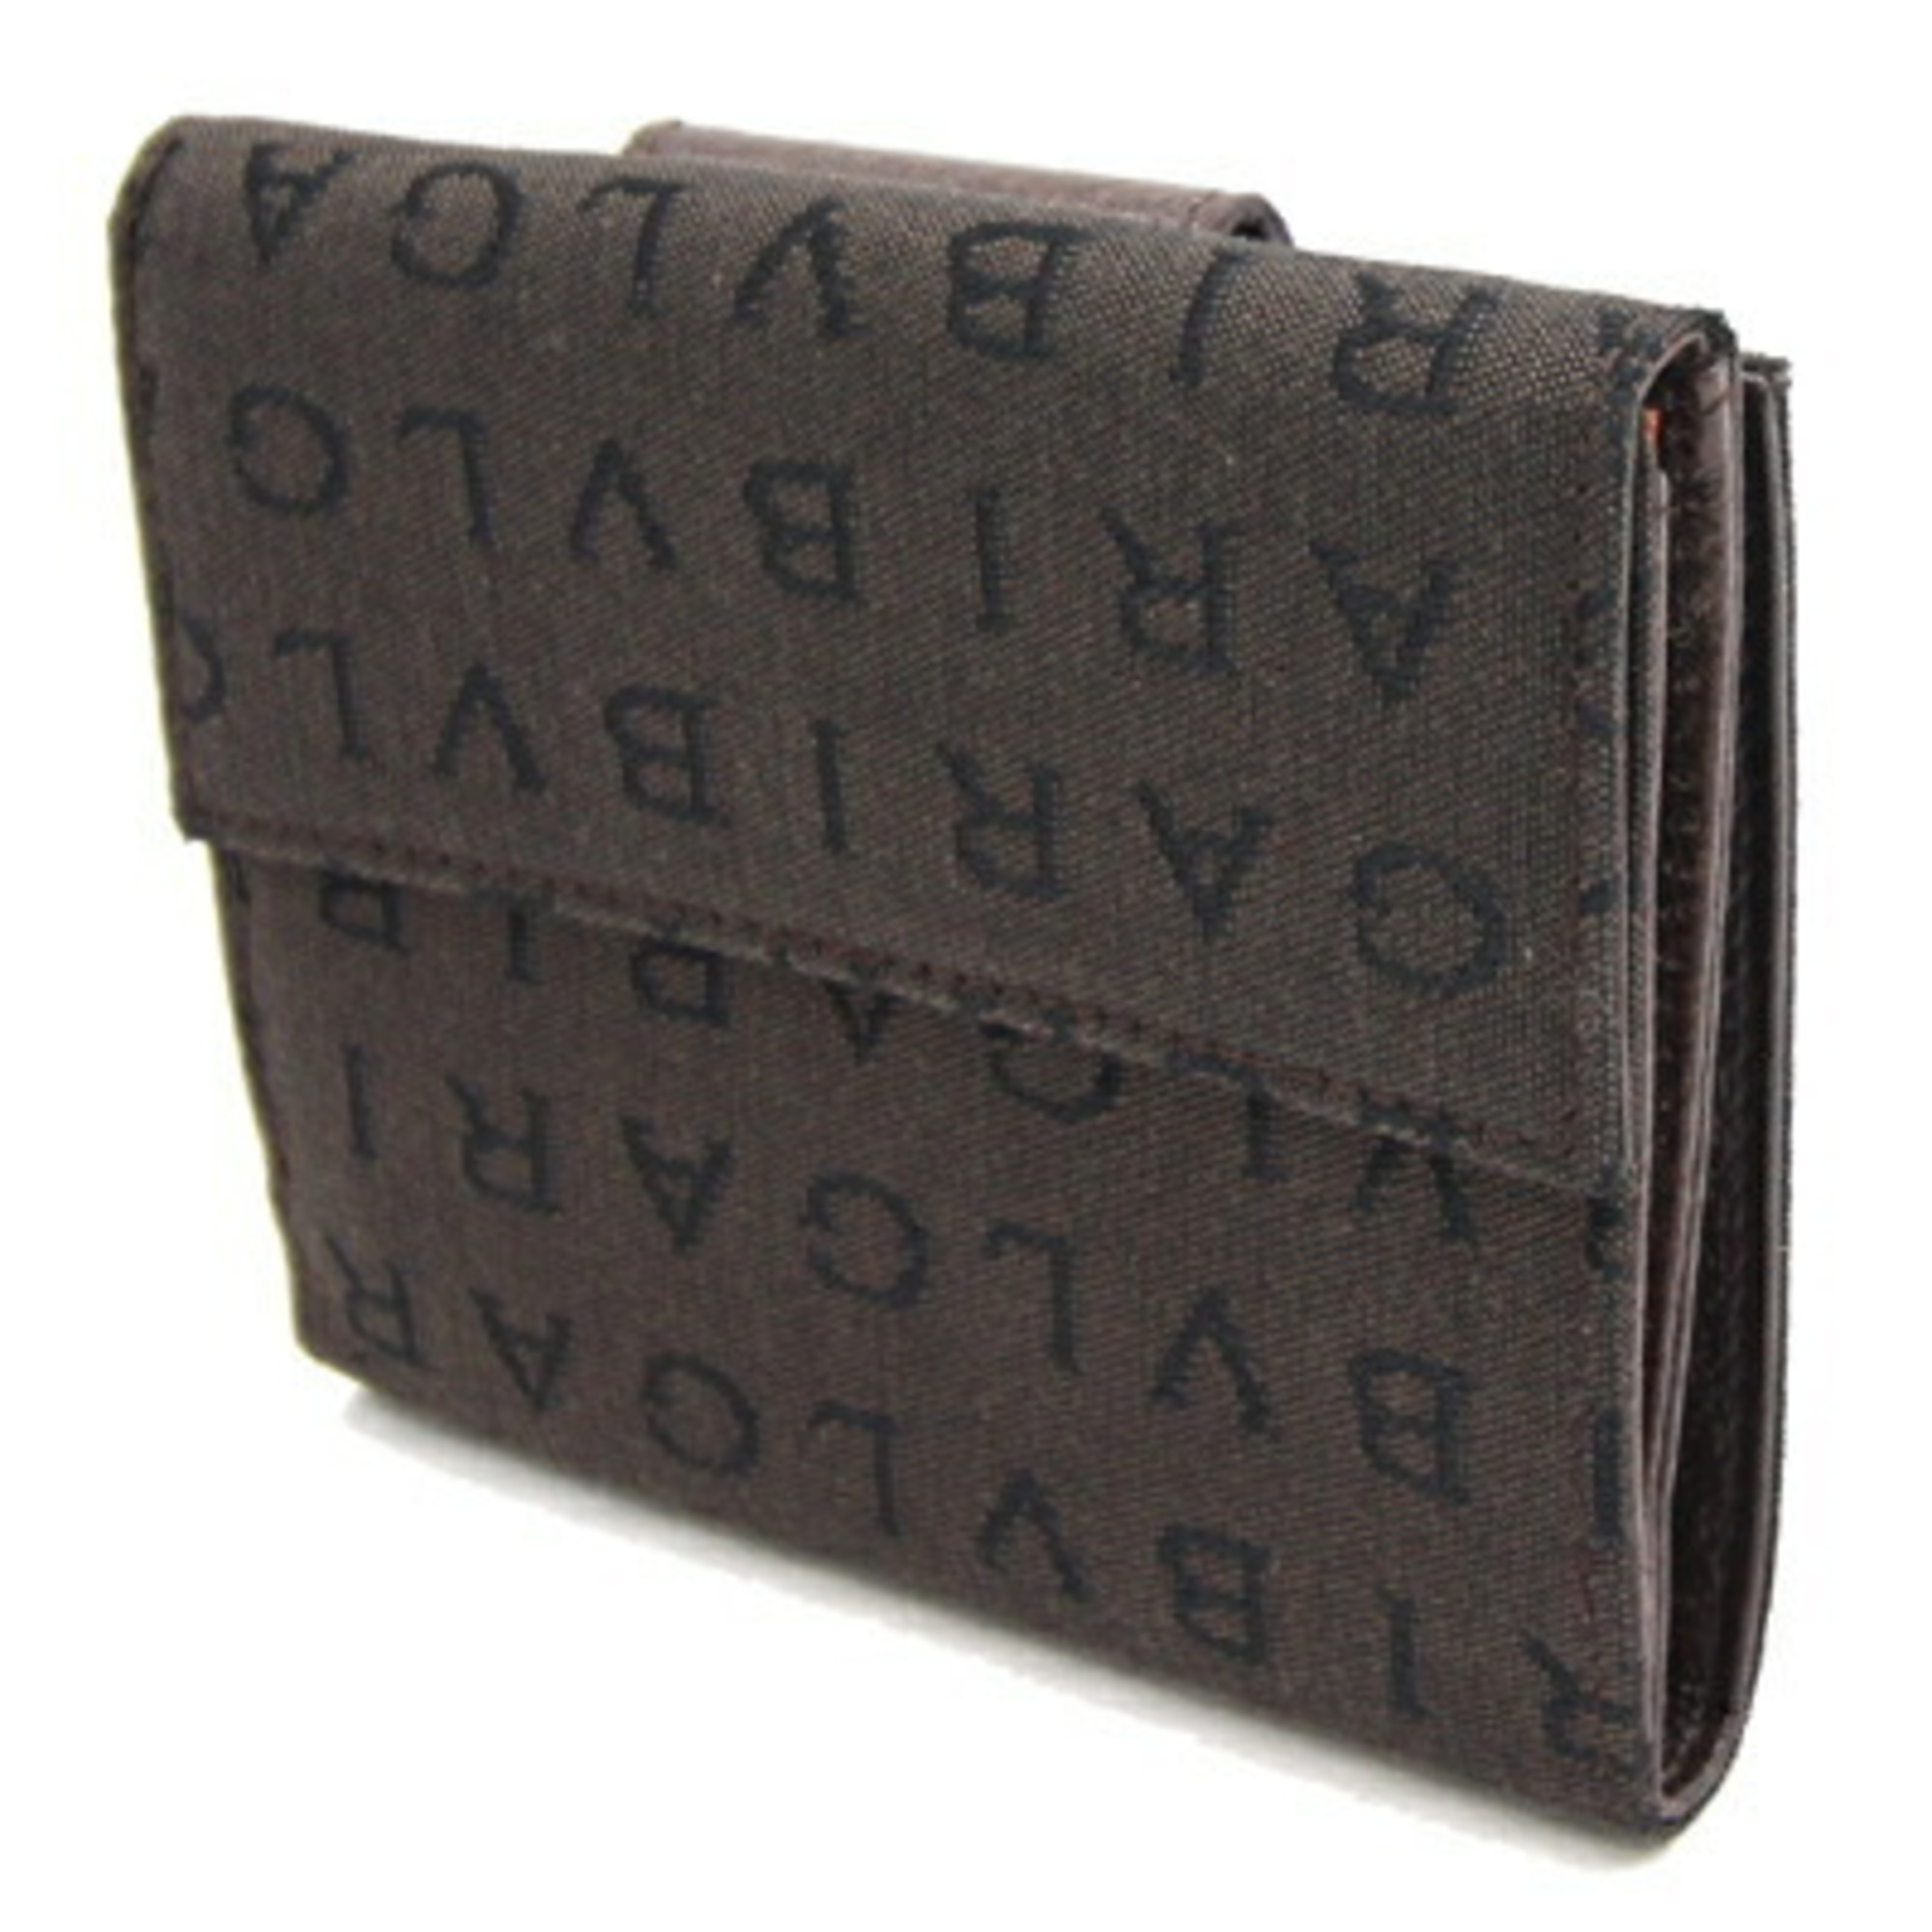 BVLGARI W Wallet Mania Dark Brown Canvas Leather Double Side Open Compact Ladies